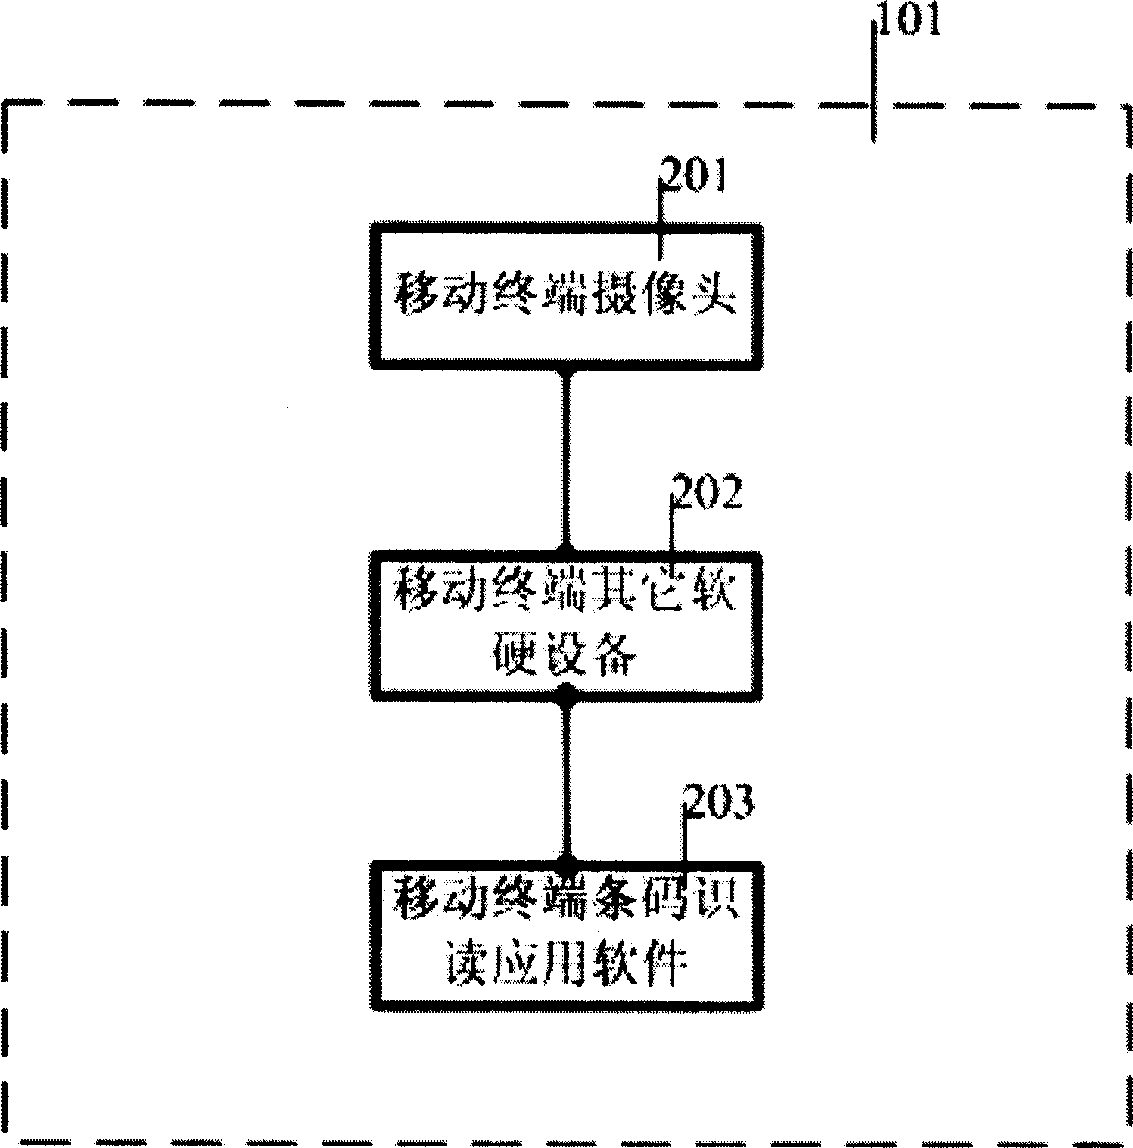 Mobile terminal auxiliary positioning method by using two-dimensional bar code